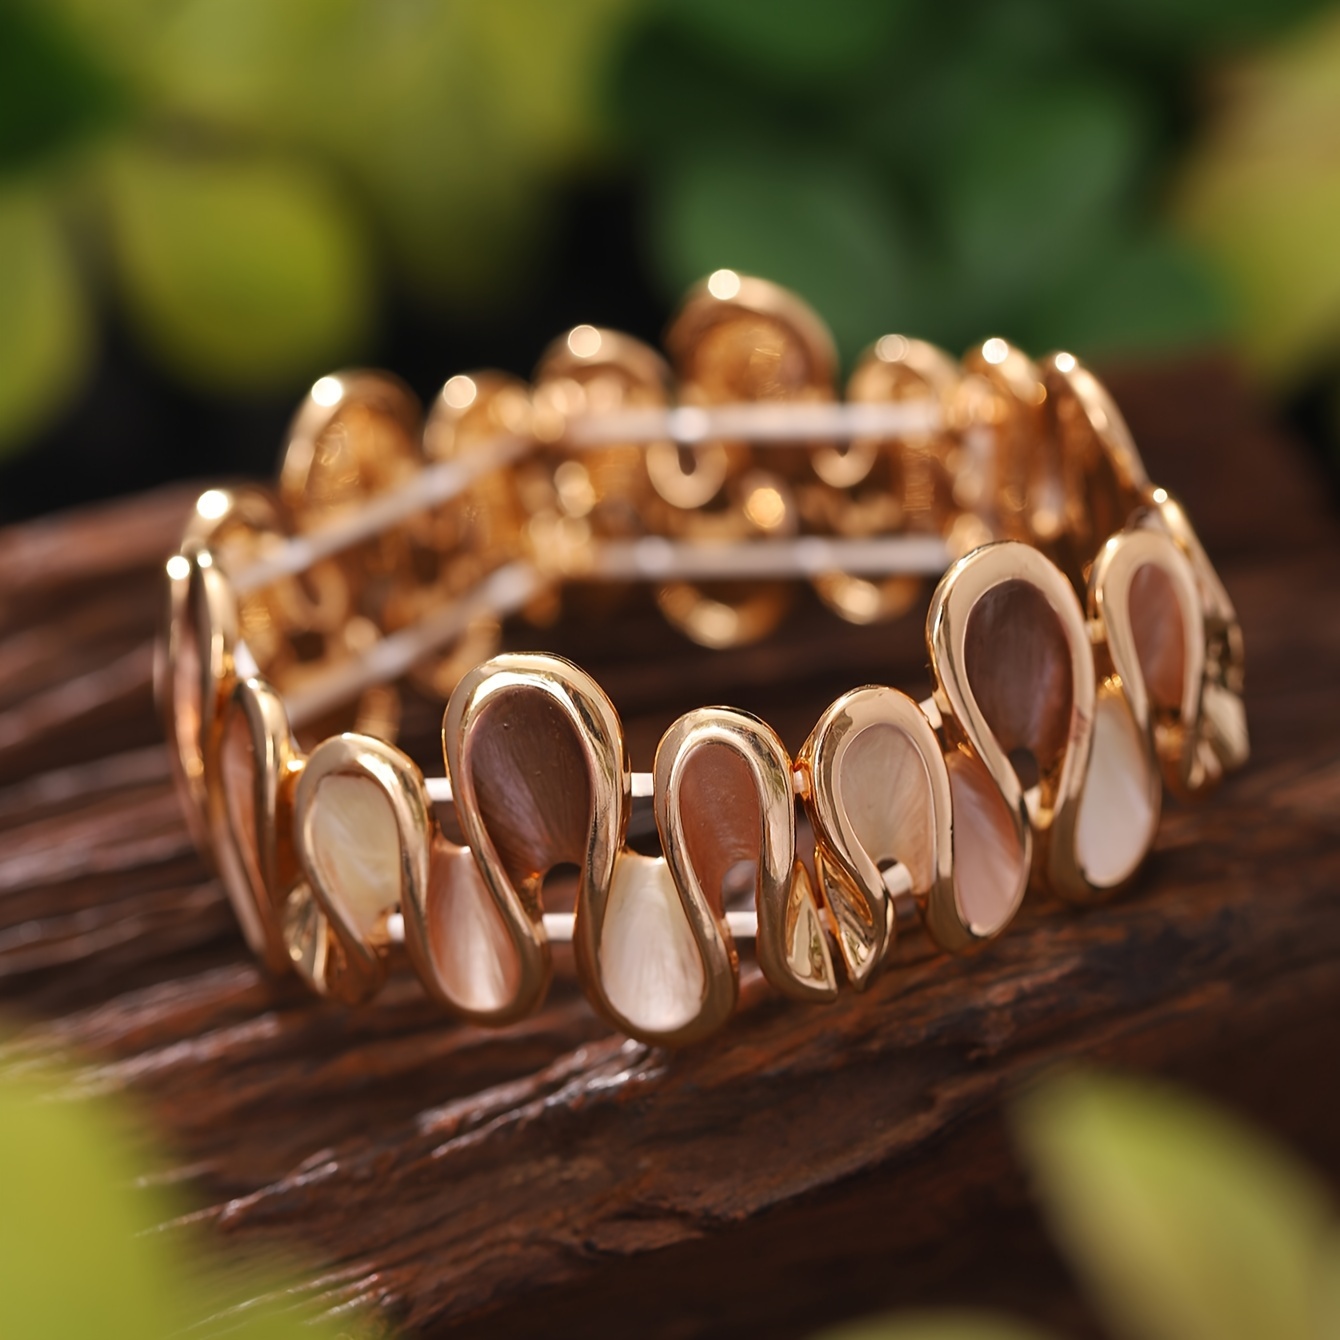 

Elegant Zinc Alloy Twist Bracelet: A Versatile Accessory For Everyday And Formal Occasions